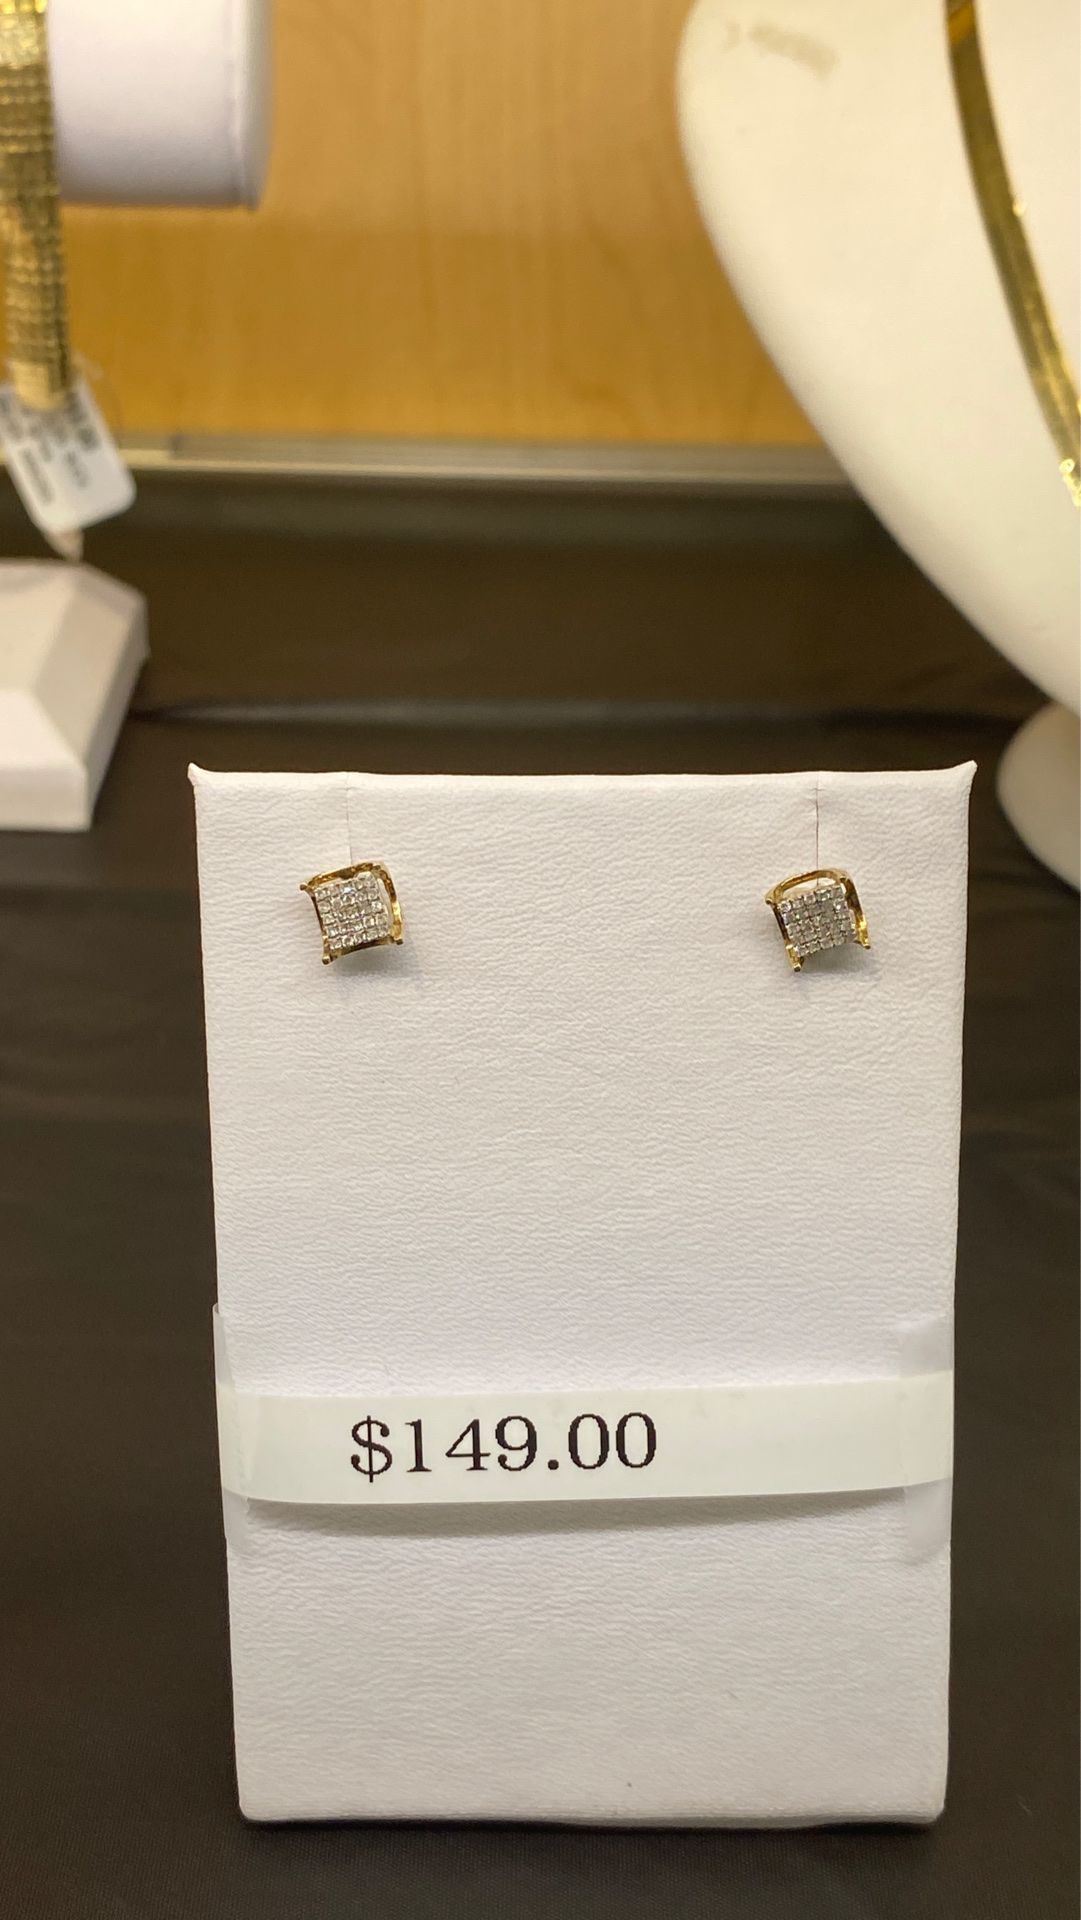 Gold and diamond earrings $149